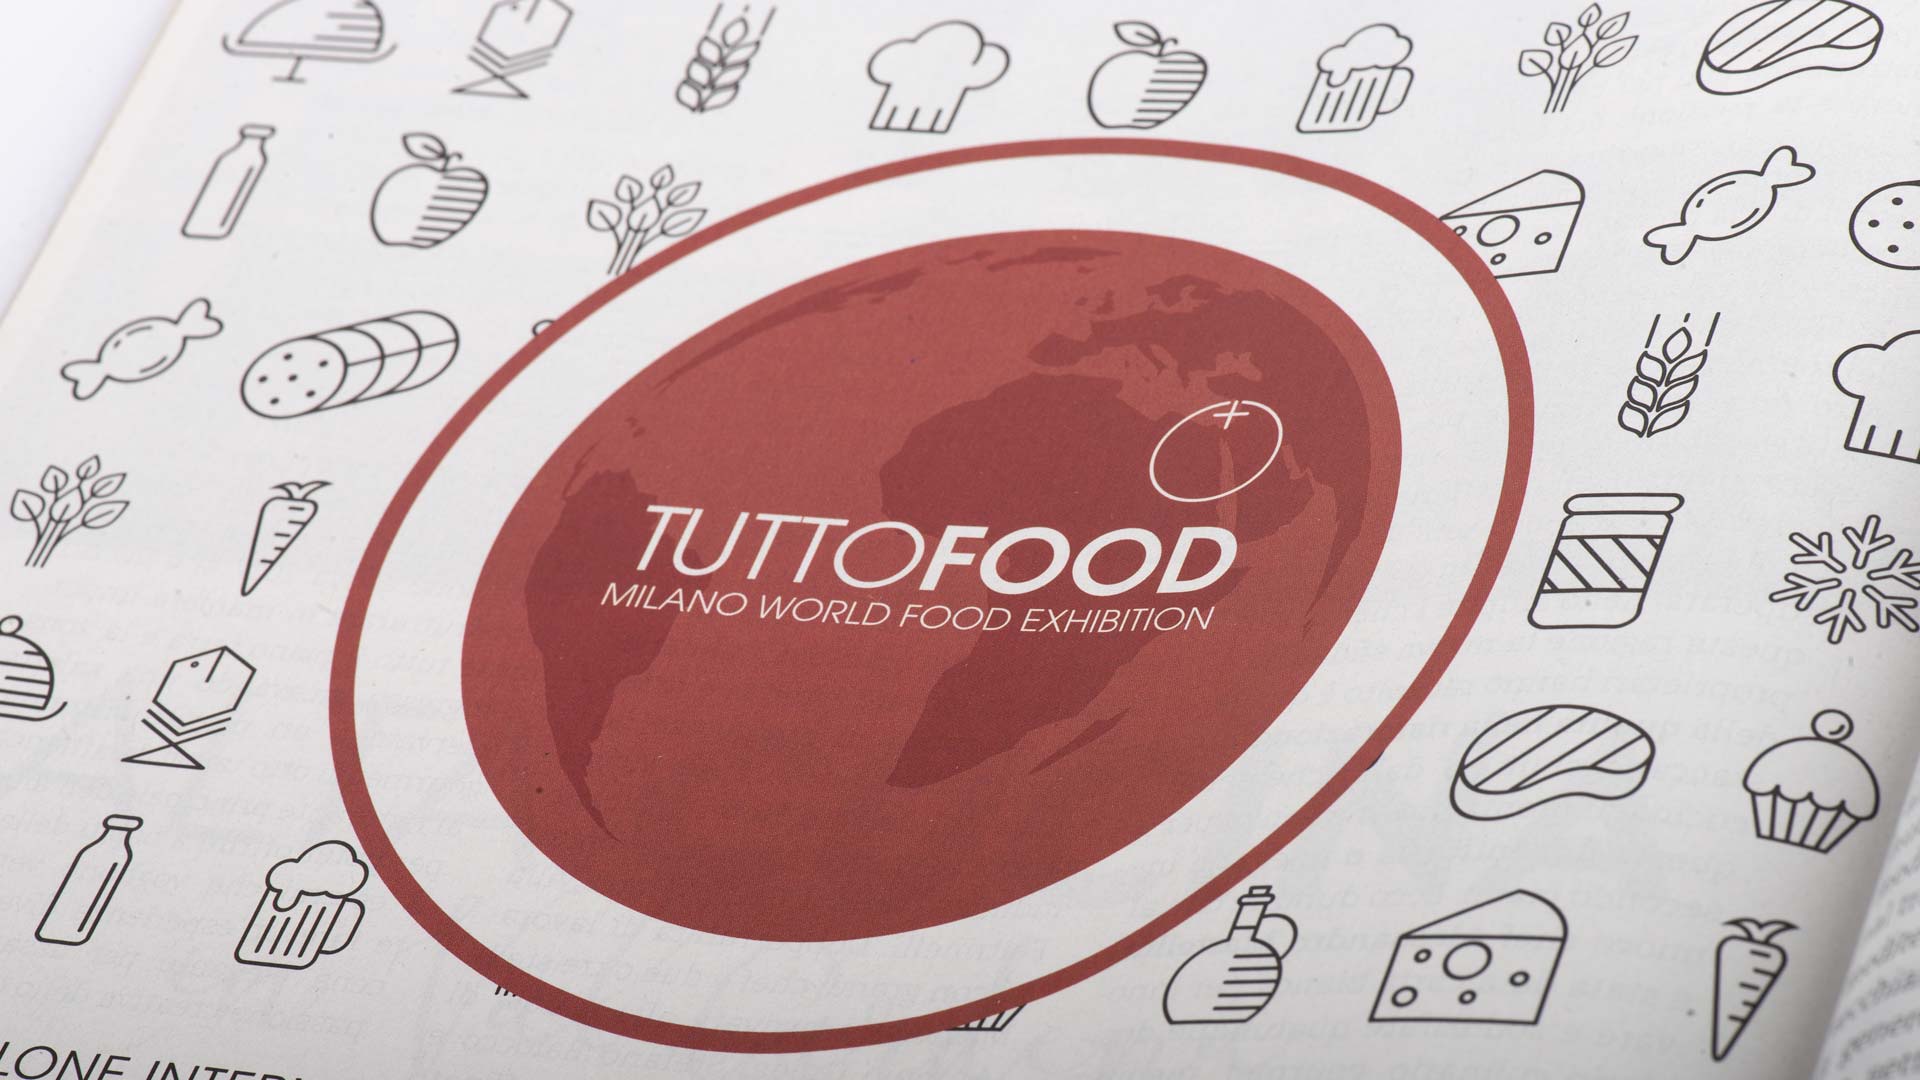 TuttoFood, Save the date